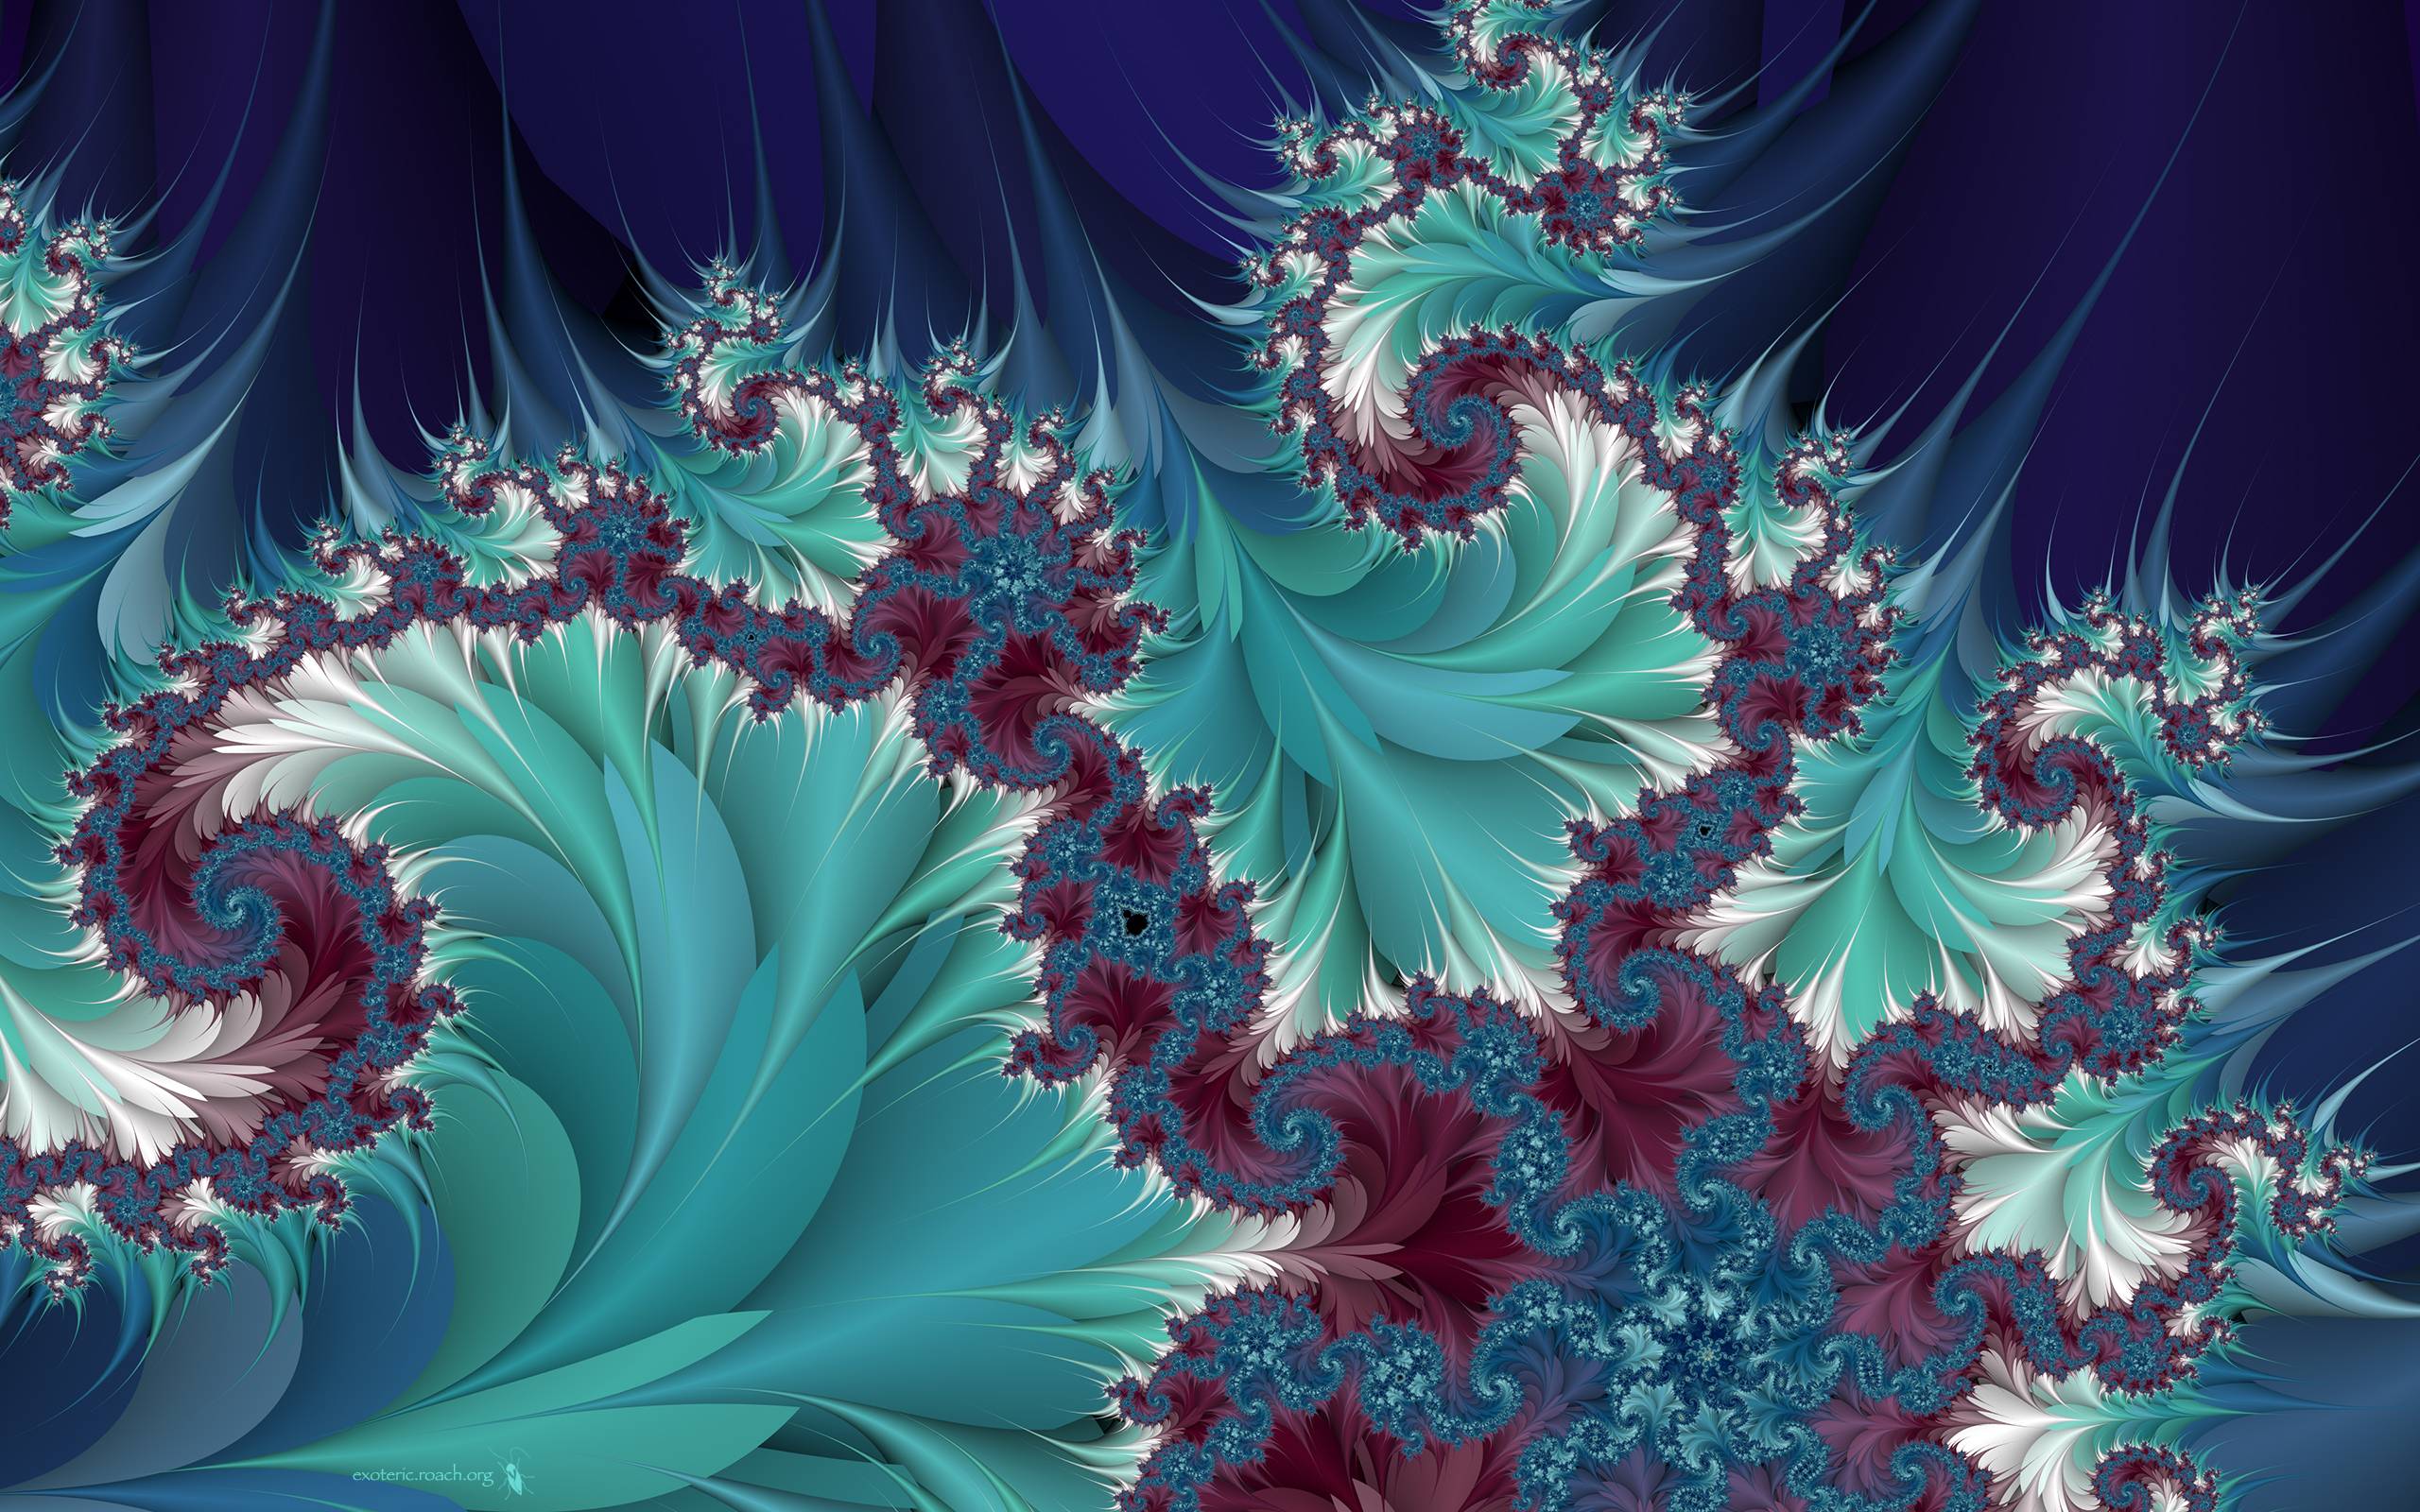 Abstract Fractals Wallpaper. Piccry.com: Picture Idea Gallery